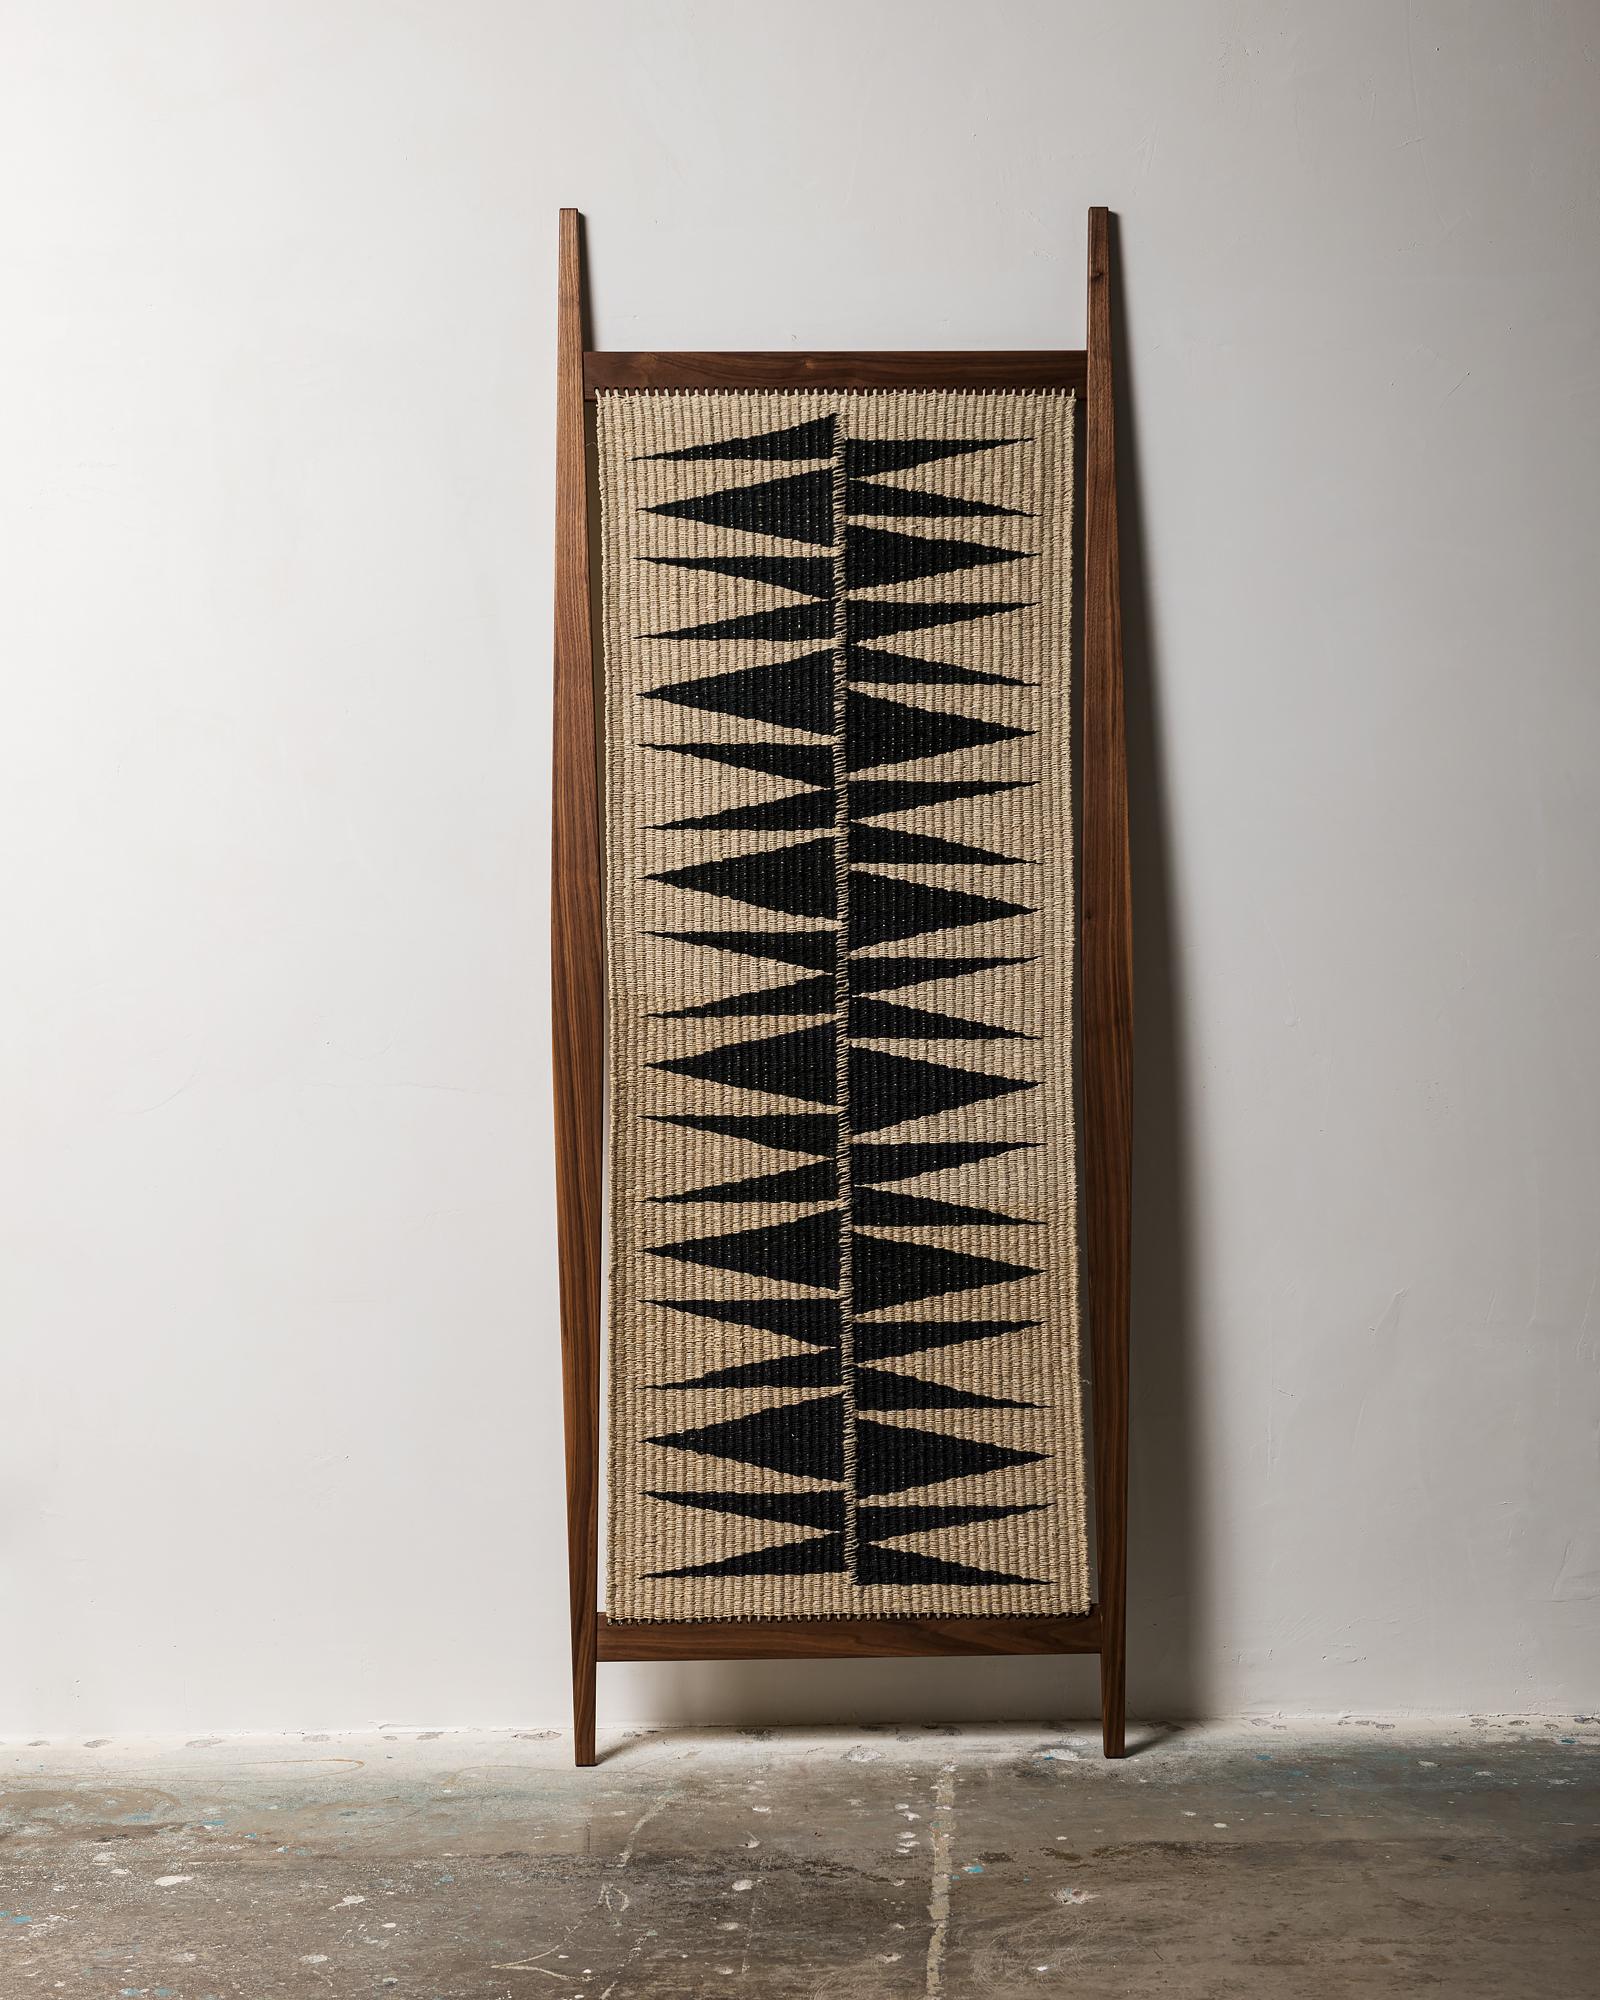 This limited edition series by Taryn Slawson features her elemental, hand-woven, hemp textiles framed in walnut or beech wood frames with a distinct minimal design. Two available in a series of 6.

Woven frames :: 29” x 78” / walnut wood, beech